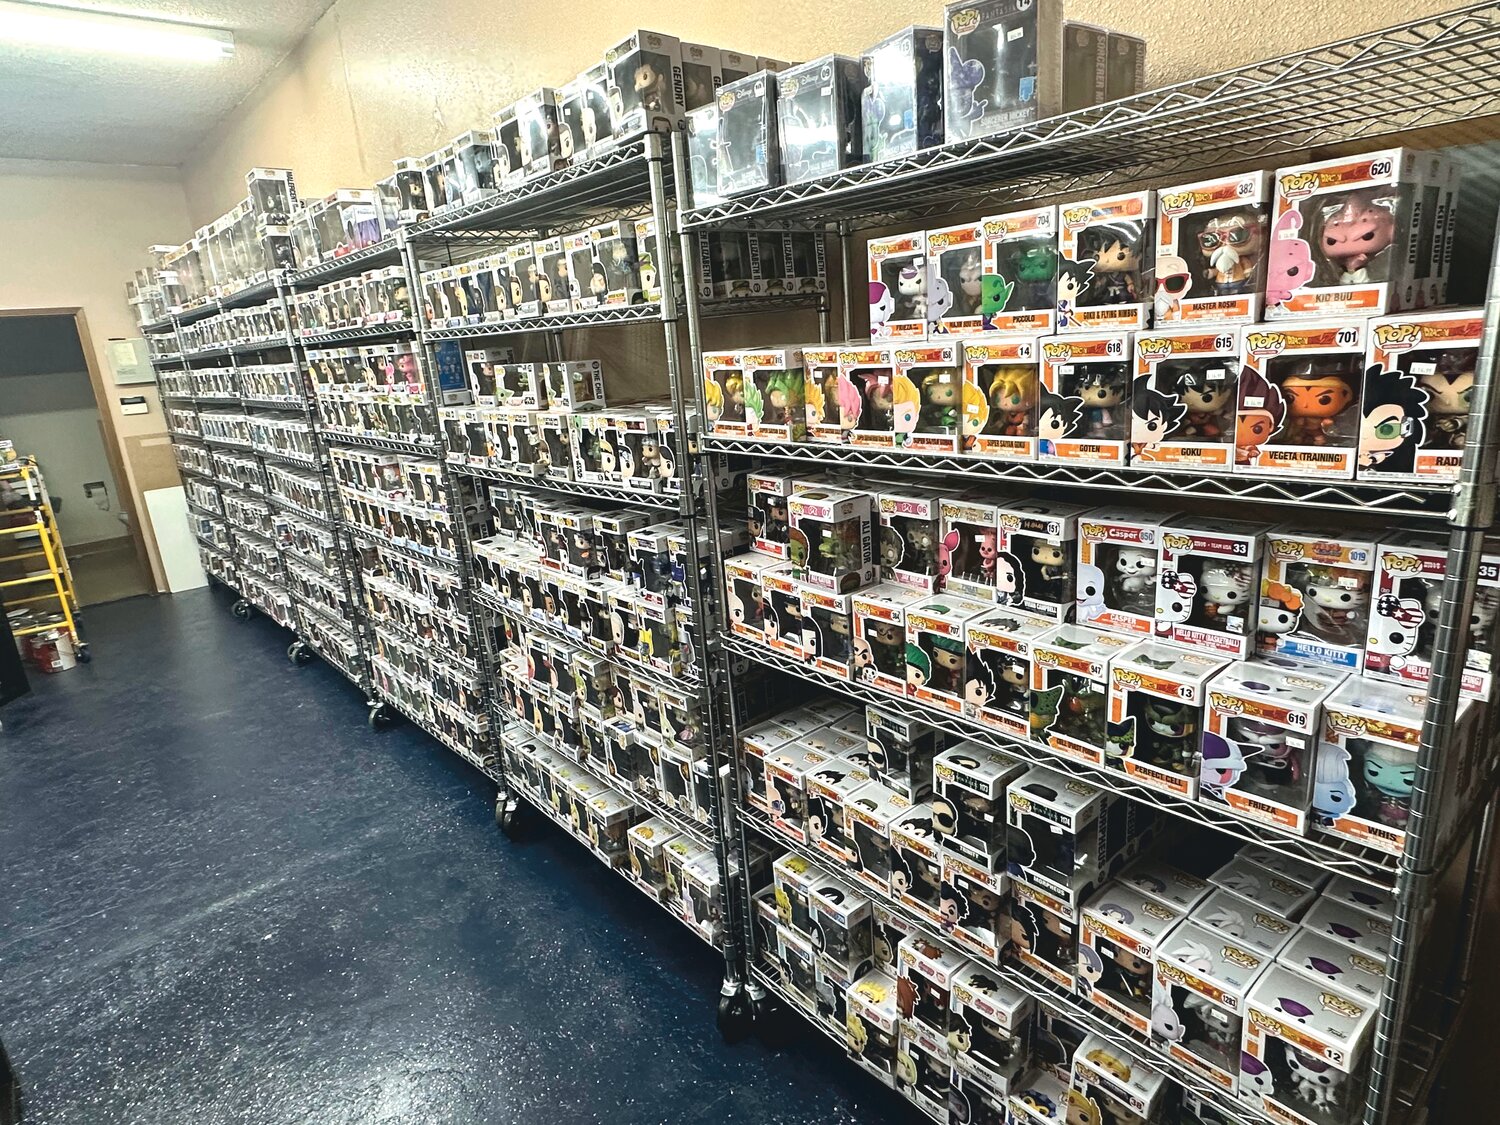 Shelves display a large selection of Funko Pop toys at Funtime Toys in Yelm.